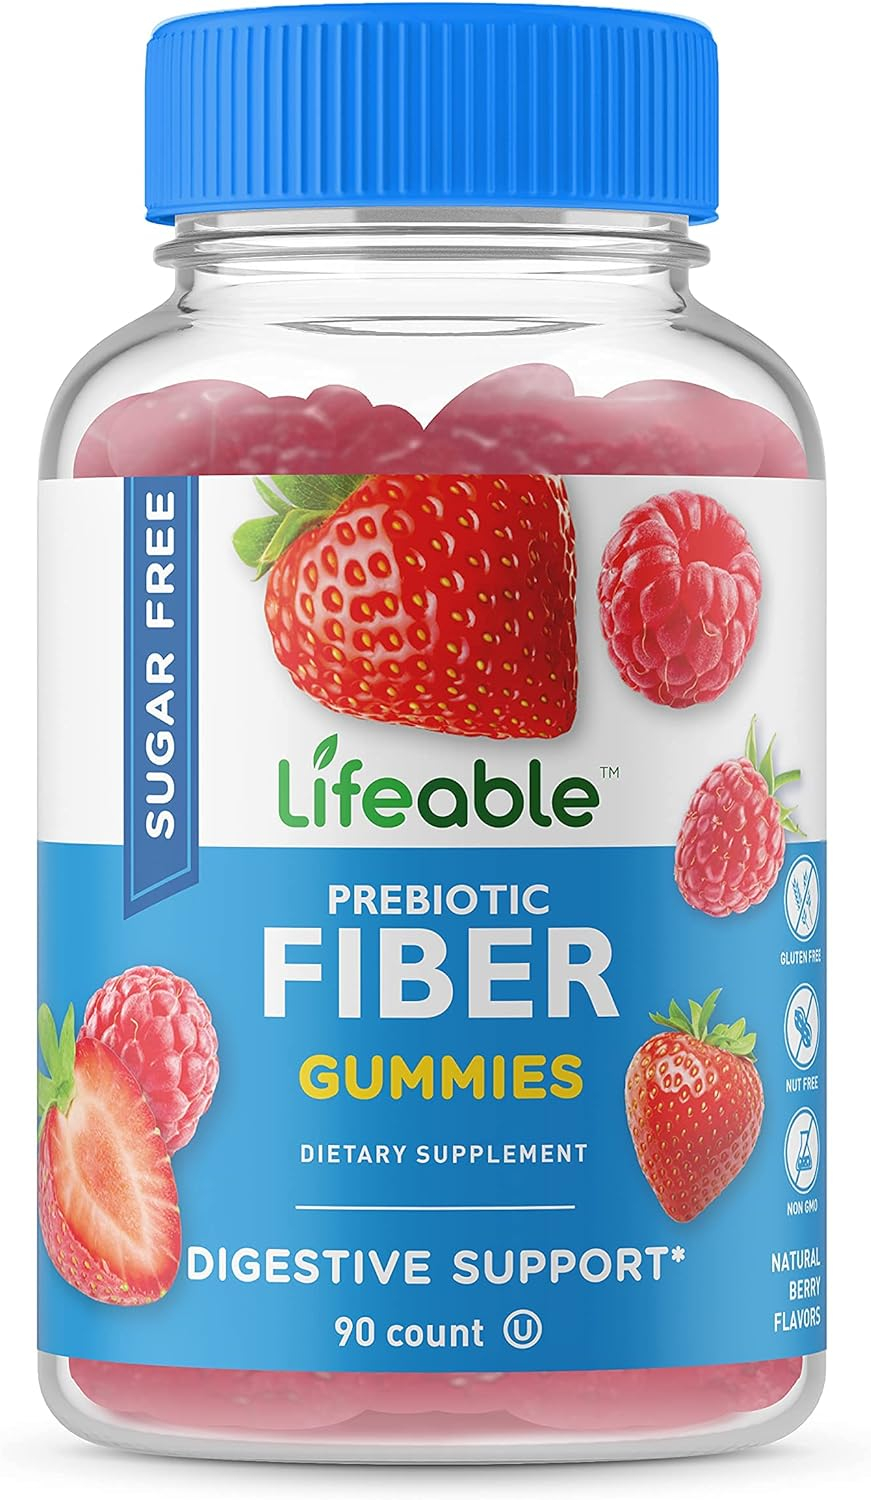 Lifeable Sugar Free Prebiotics Fiber for Adults - 4g - Great Tasting Natural Flavored Gummy Supplement - Keto Friendly - Gluten Free, Vegetarian, GMO Free - for Gut and Digestive Health - 90 Gummies